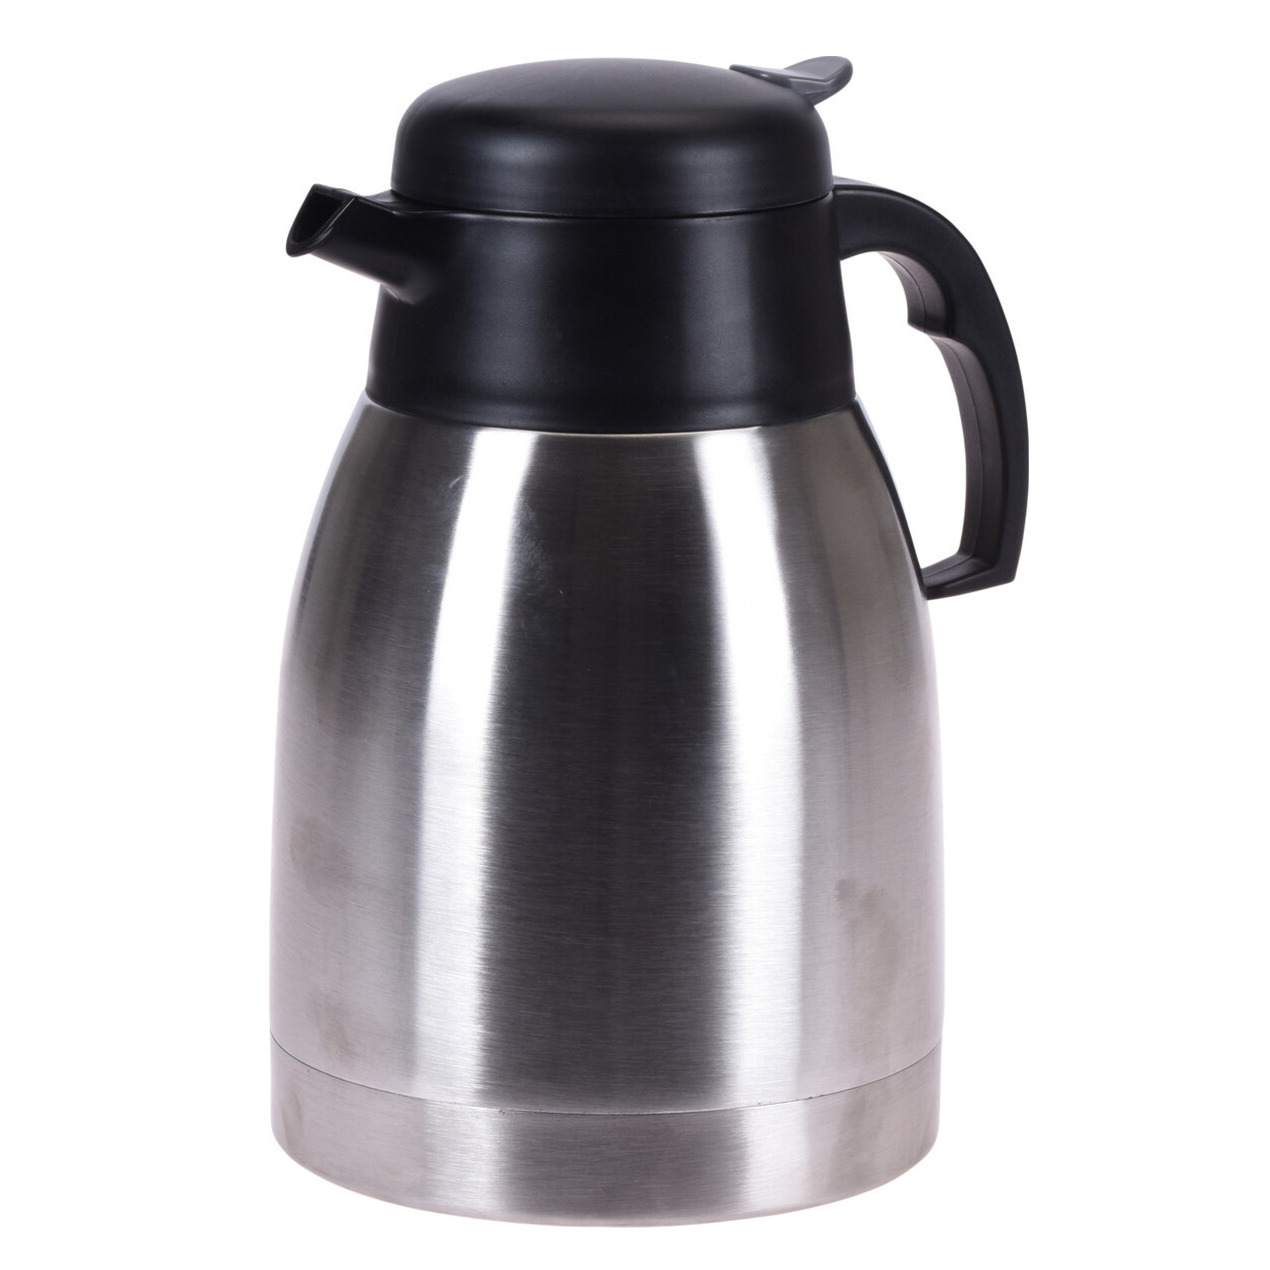 1x Koffie-thee thermoskan RVS 1500 ml